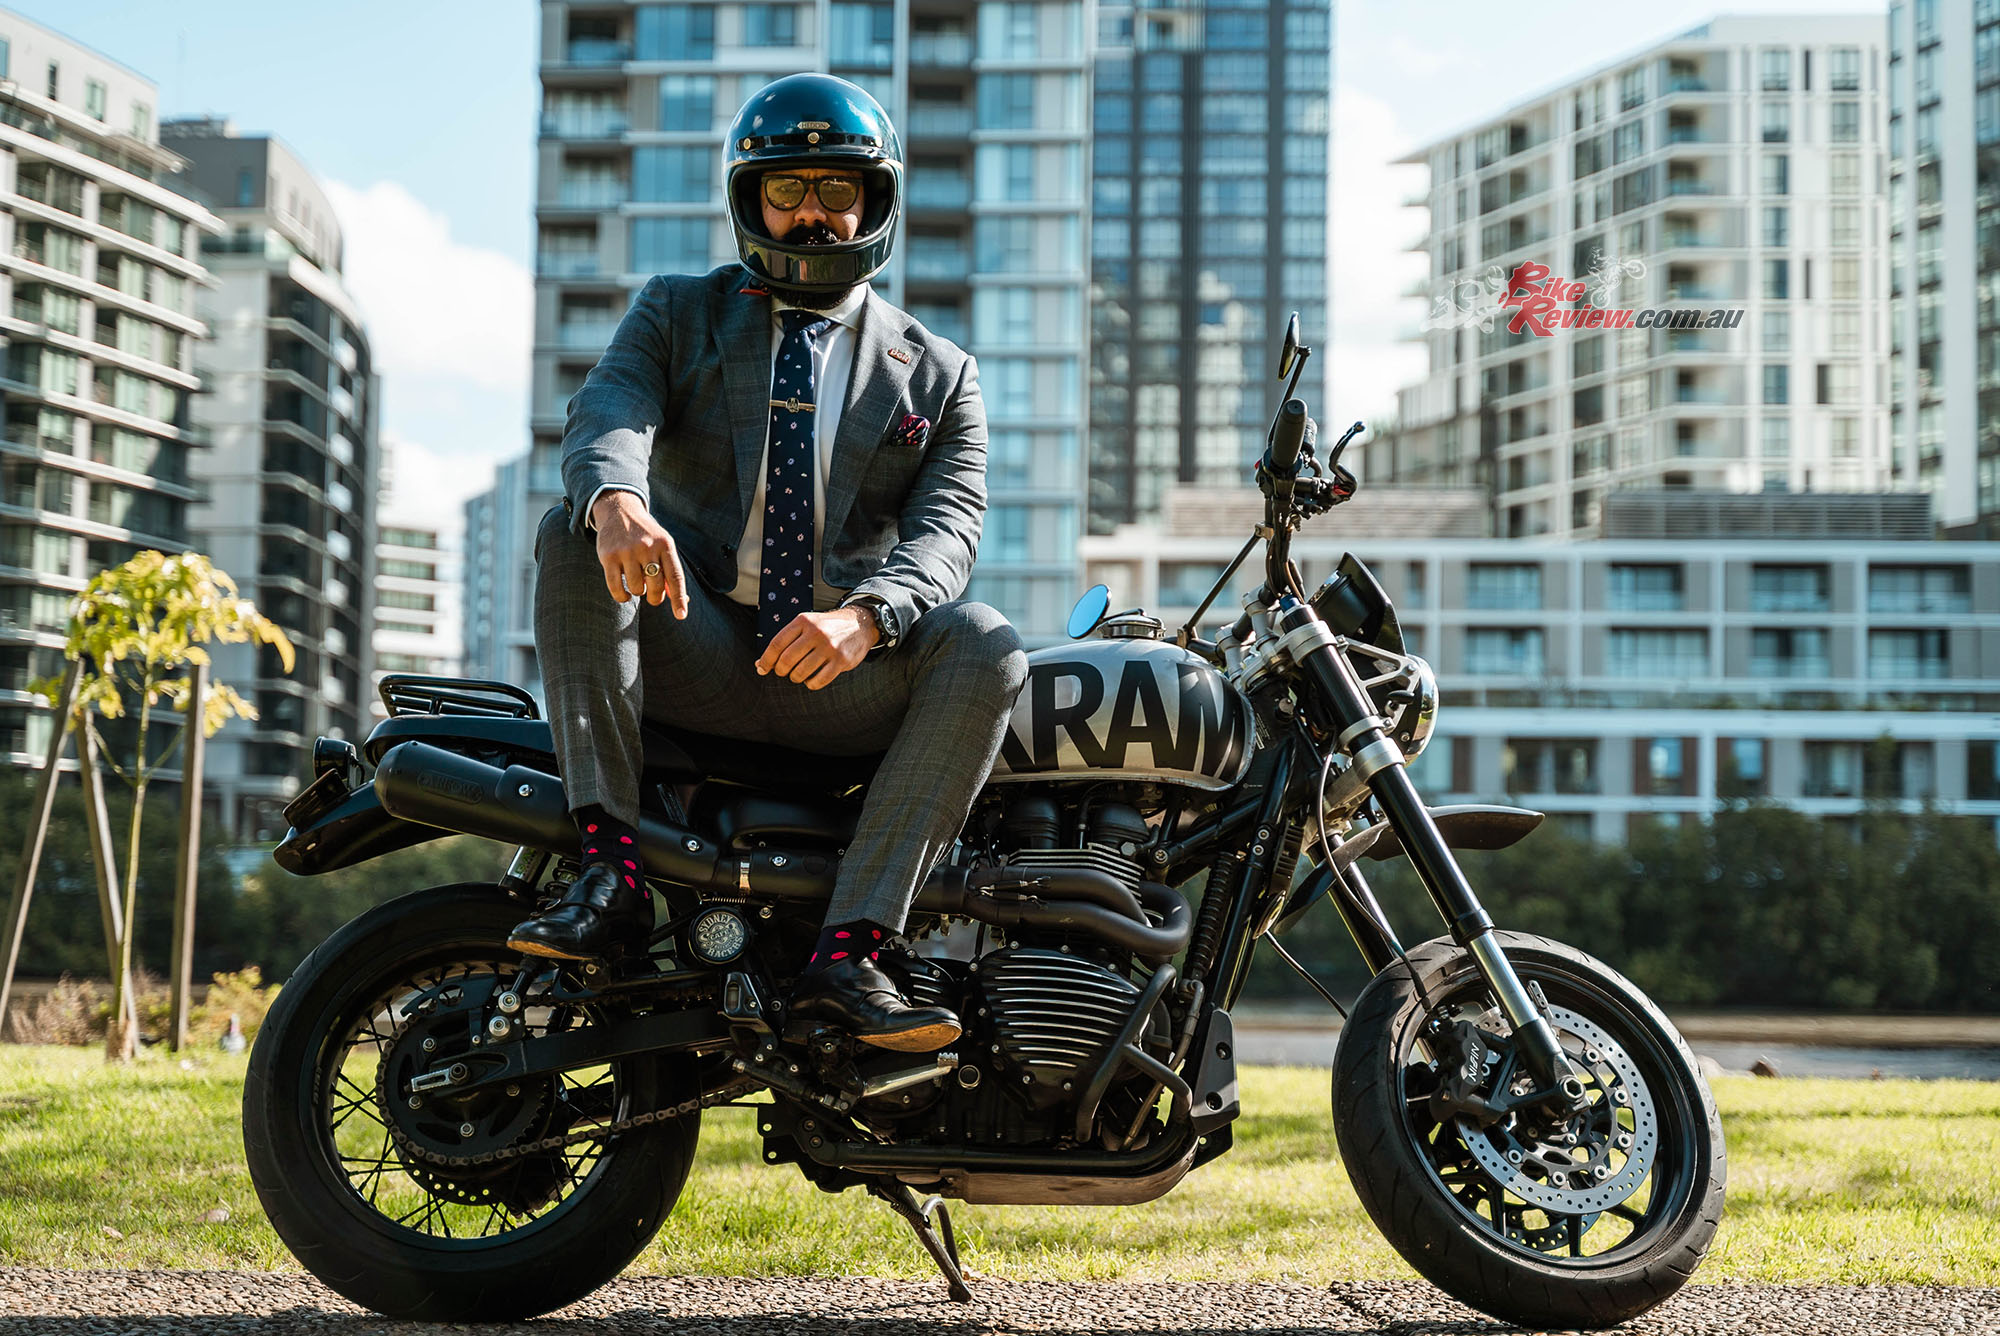 Founder of The Distinguished Gentleman’s Ride, Mark Hawwa, says: “2022 marks an amazing year for The Distinguished Gentleman’s Ride. It marks the first year of a new decade for us..."